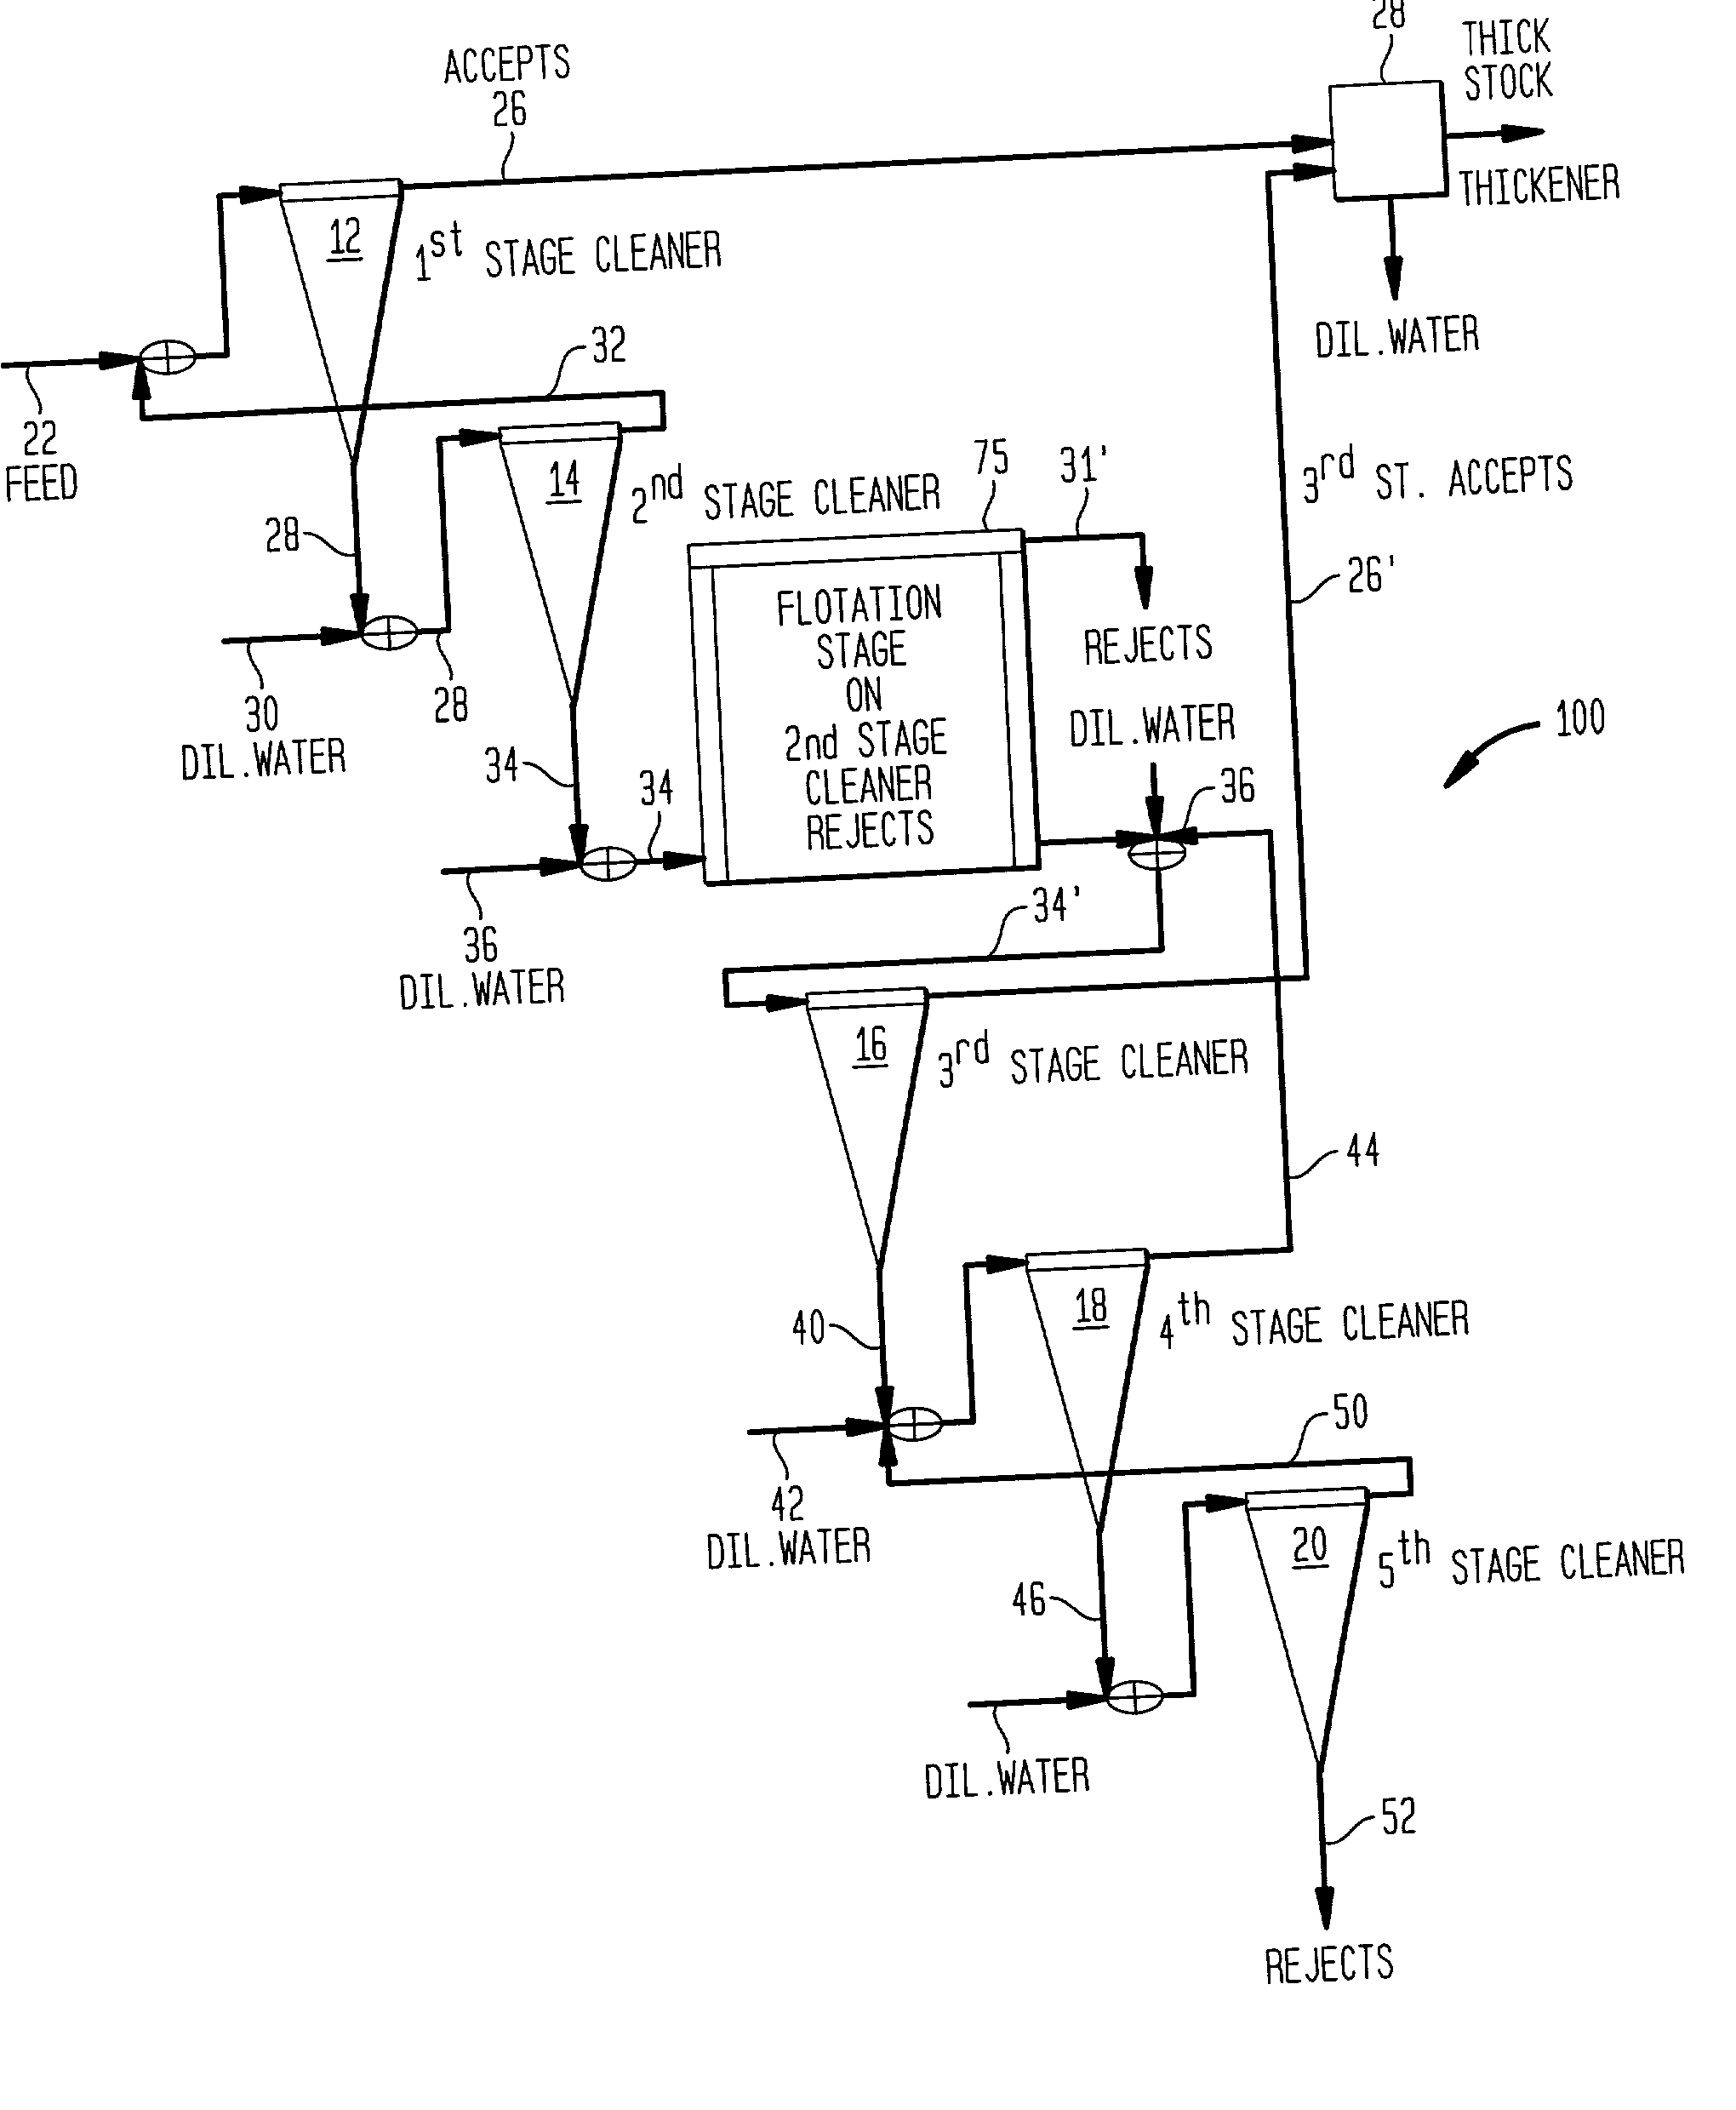 Hybrid multistage forward cleaner system with floation cell